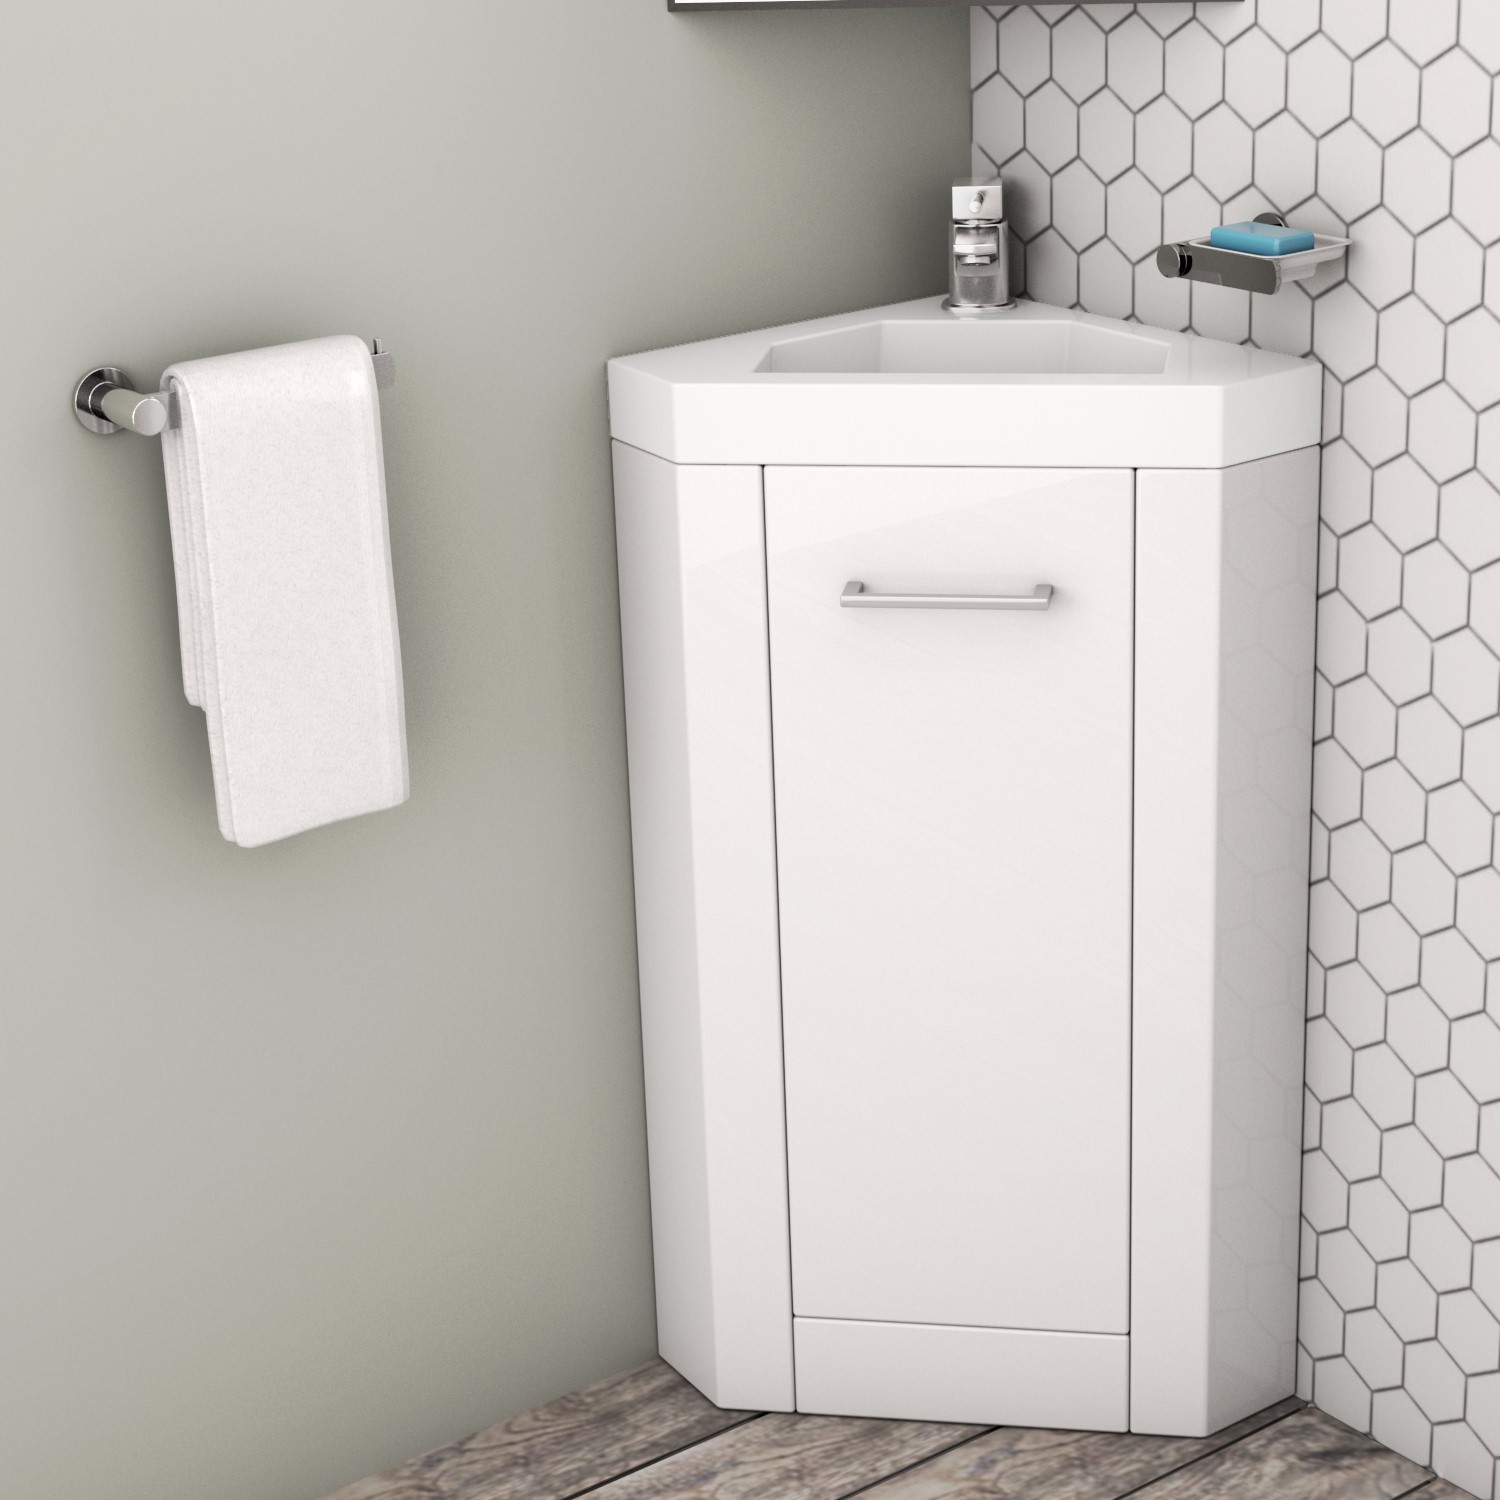 400mm White Cloakroom Corner Vanity, Corner Sinks For Bathrooms With Cabinets